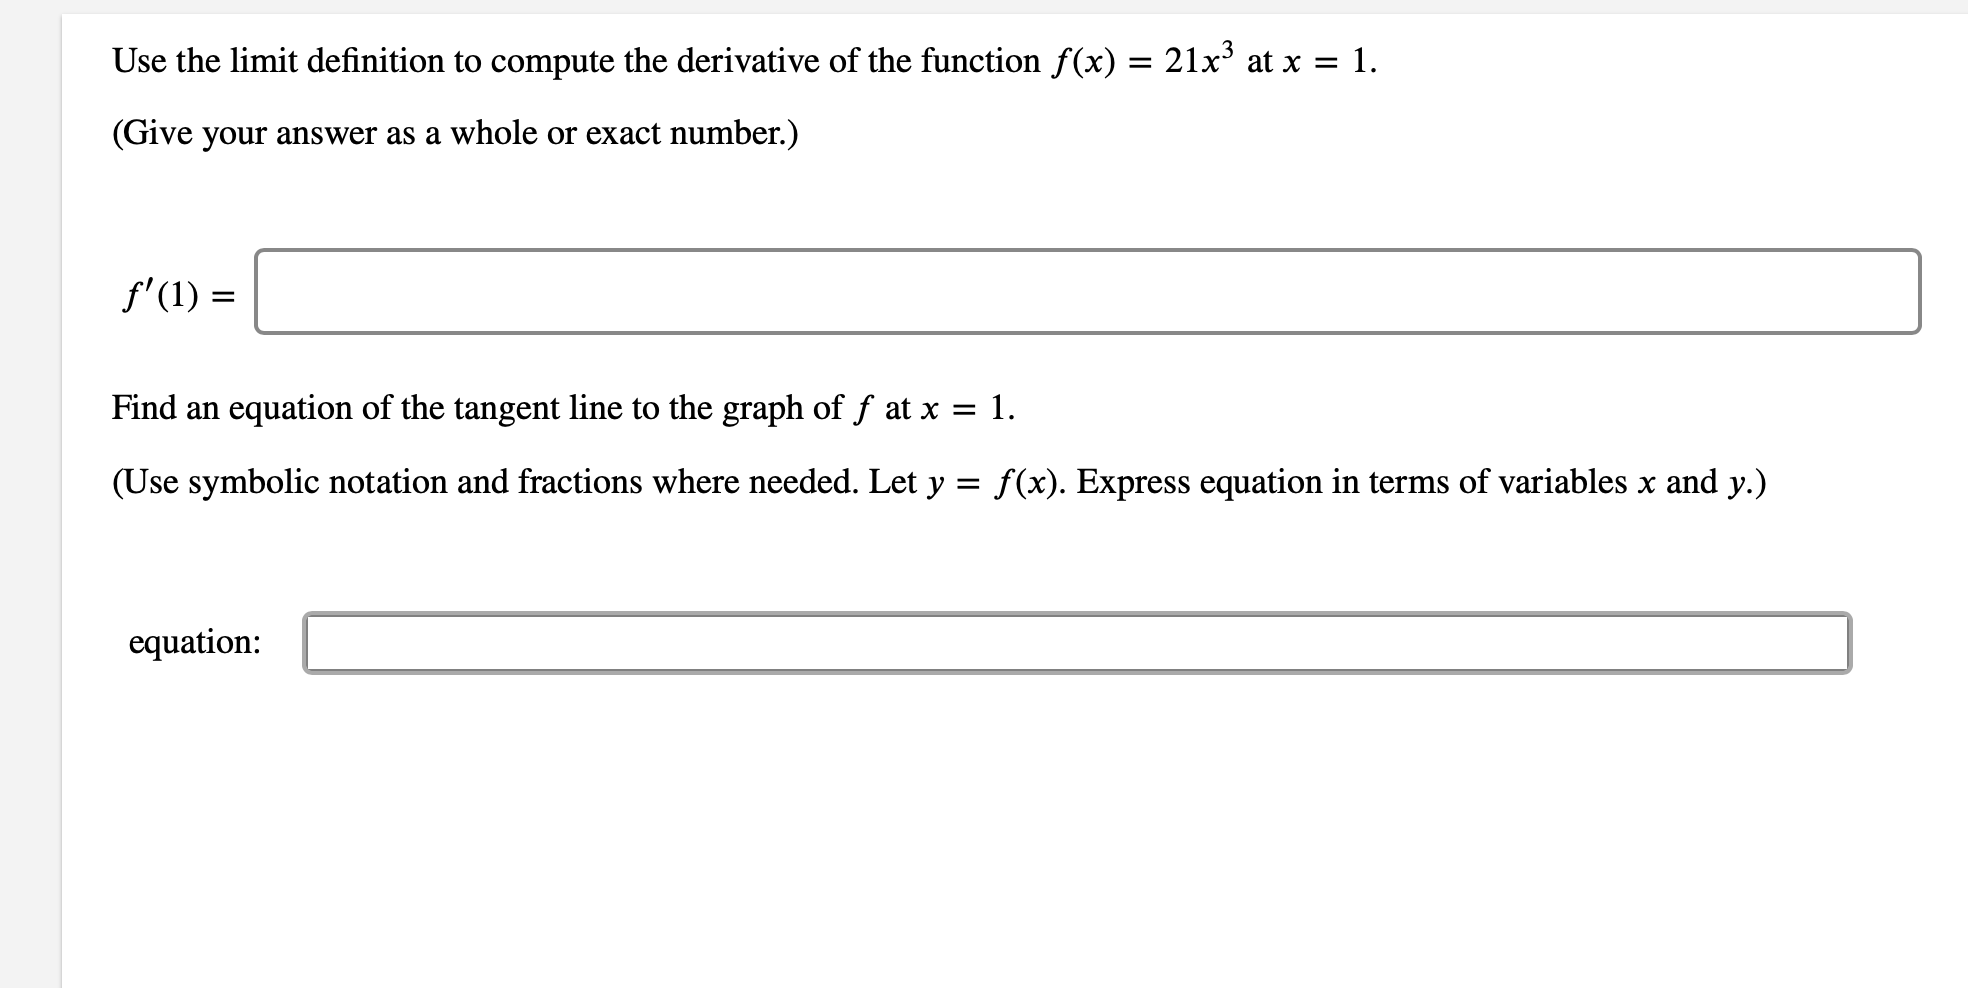 Use the limit definition to compute the derivative of the function f(x) = 21x3 at x = 1.
(Give your answer as a whole or exact number.)
f'(1)
Find an
equation of the tangent line to the graph of f at x = 1.
(Use symbolic notation and fractions where needed. Let y =
f(x). Express equation in terms of variables x and y.)
equation
